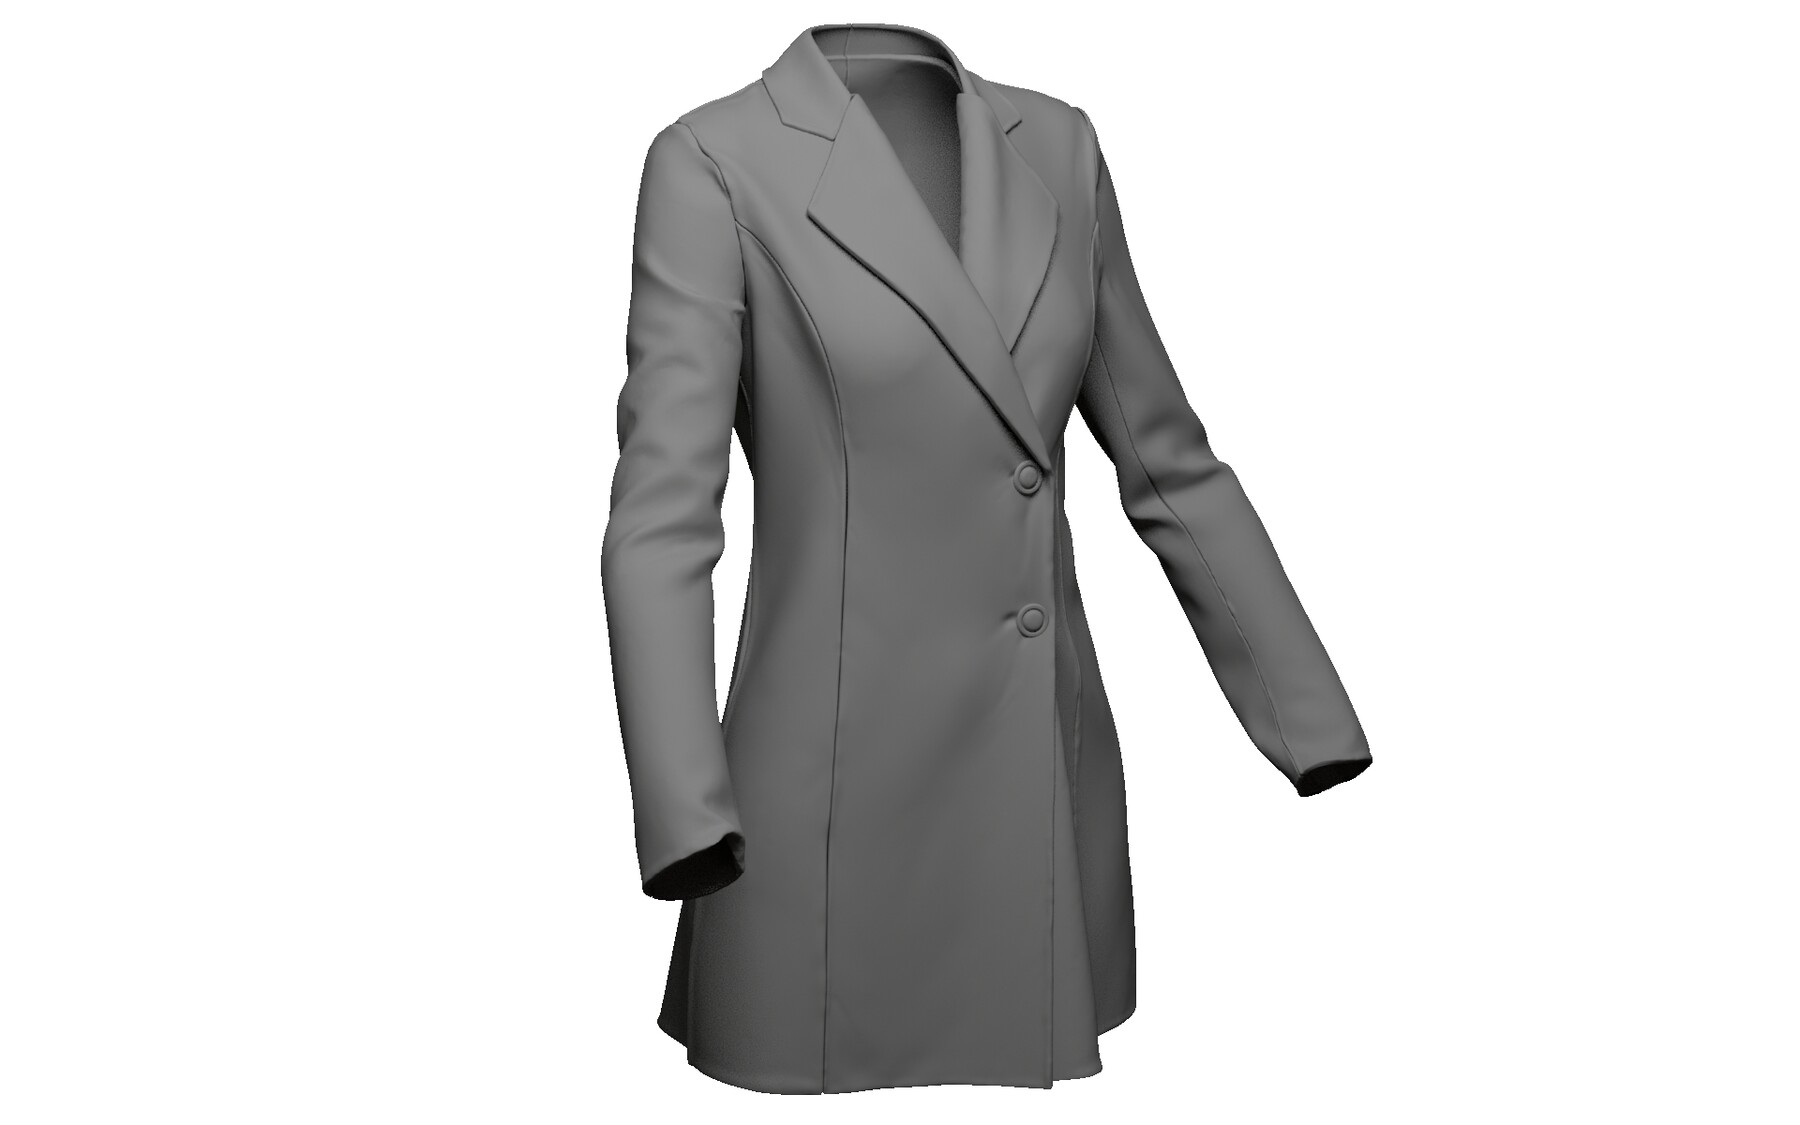 ArtStation - Female Coat cloth for Game, animation with low poly | Game ...